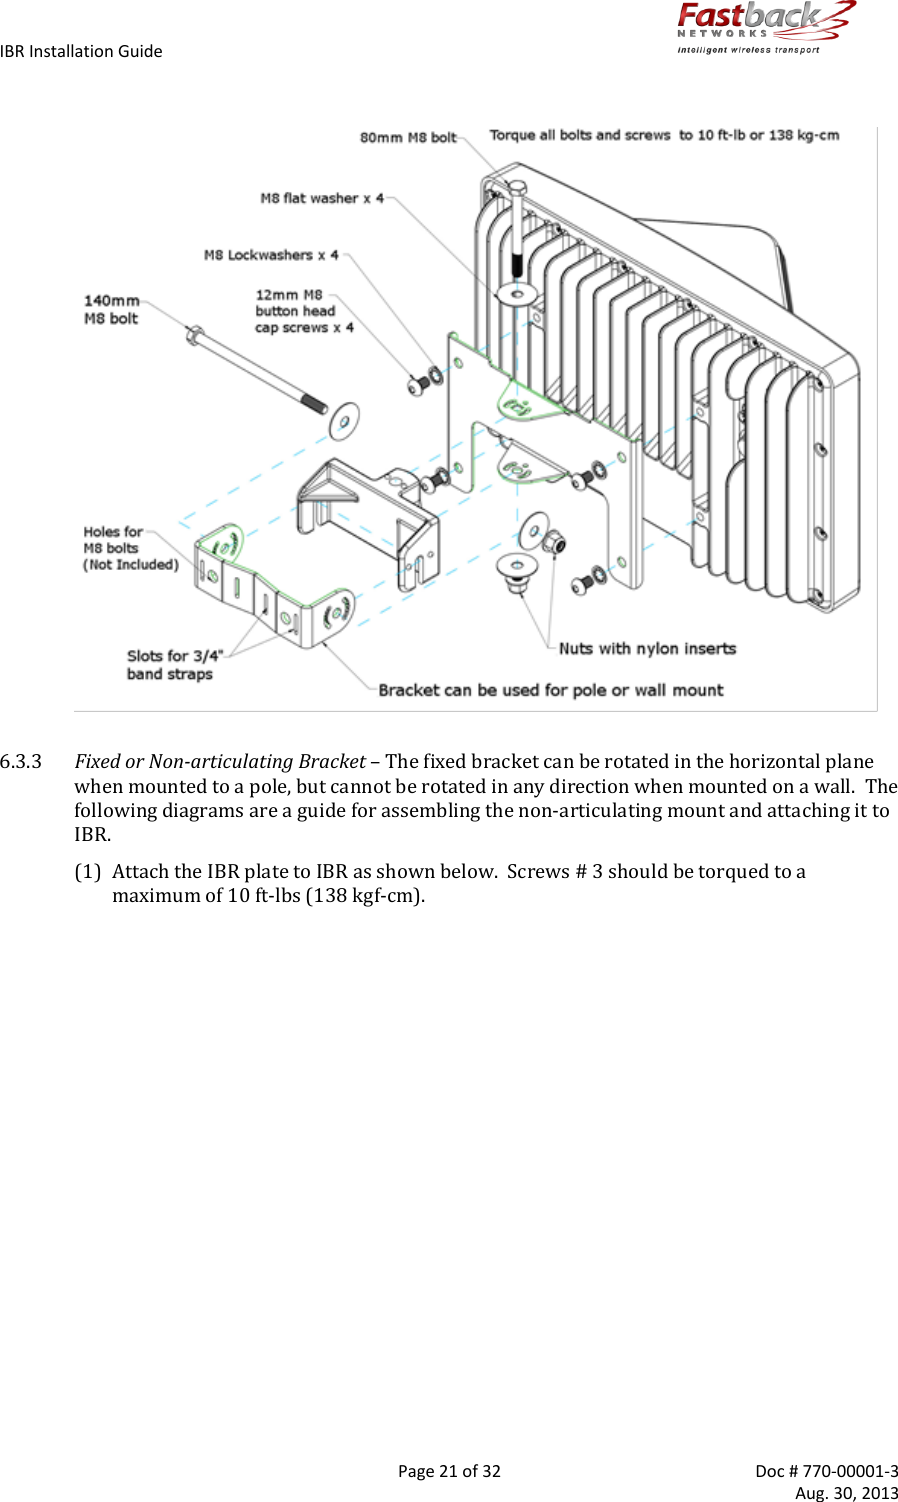 IBR Installation Guide        Page 21 of 32  Doc # 770-00001-3     Aug. 30, 2013     6.3.3 Fixed or Non-articulating Bracket – The fixed bracket can be rotated in the horizontal plane when mounted to a pole, but cannot be rotated in any direction when mounted on a wall.  The following diagrams are a guide for assembling the non-articulating mount and attaching it to IBR. (1) Attach the IBR plate to IBR as shown below.  Screws # 3 should be torqued to a maximum of 10 ft-lbs (138 kgf-cm).  